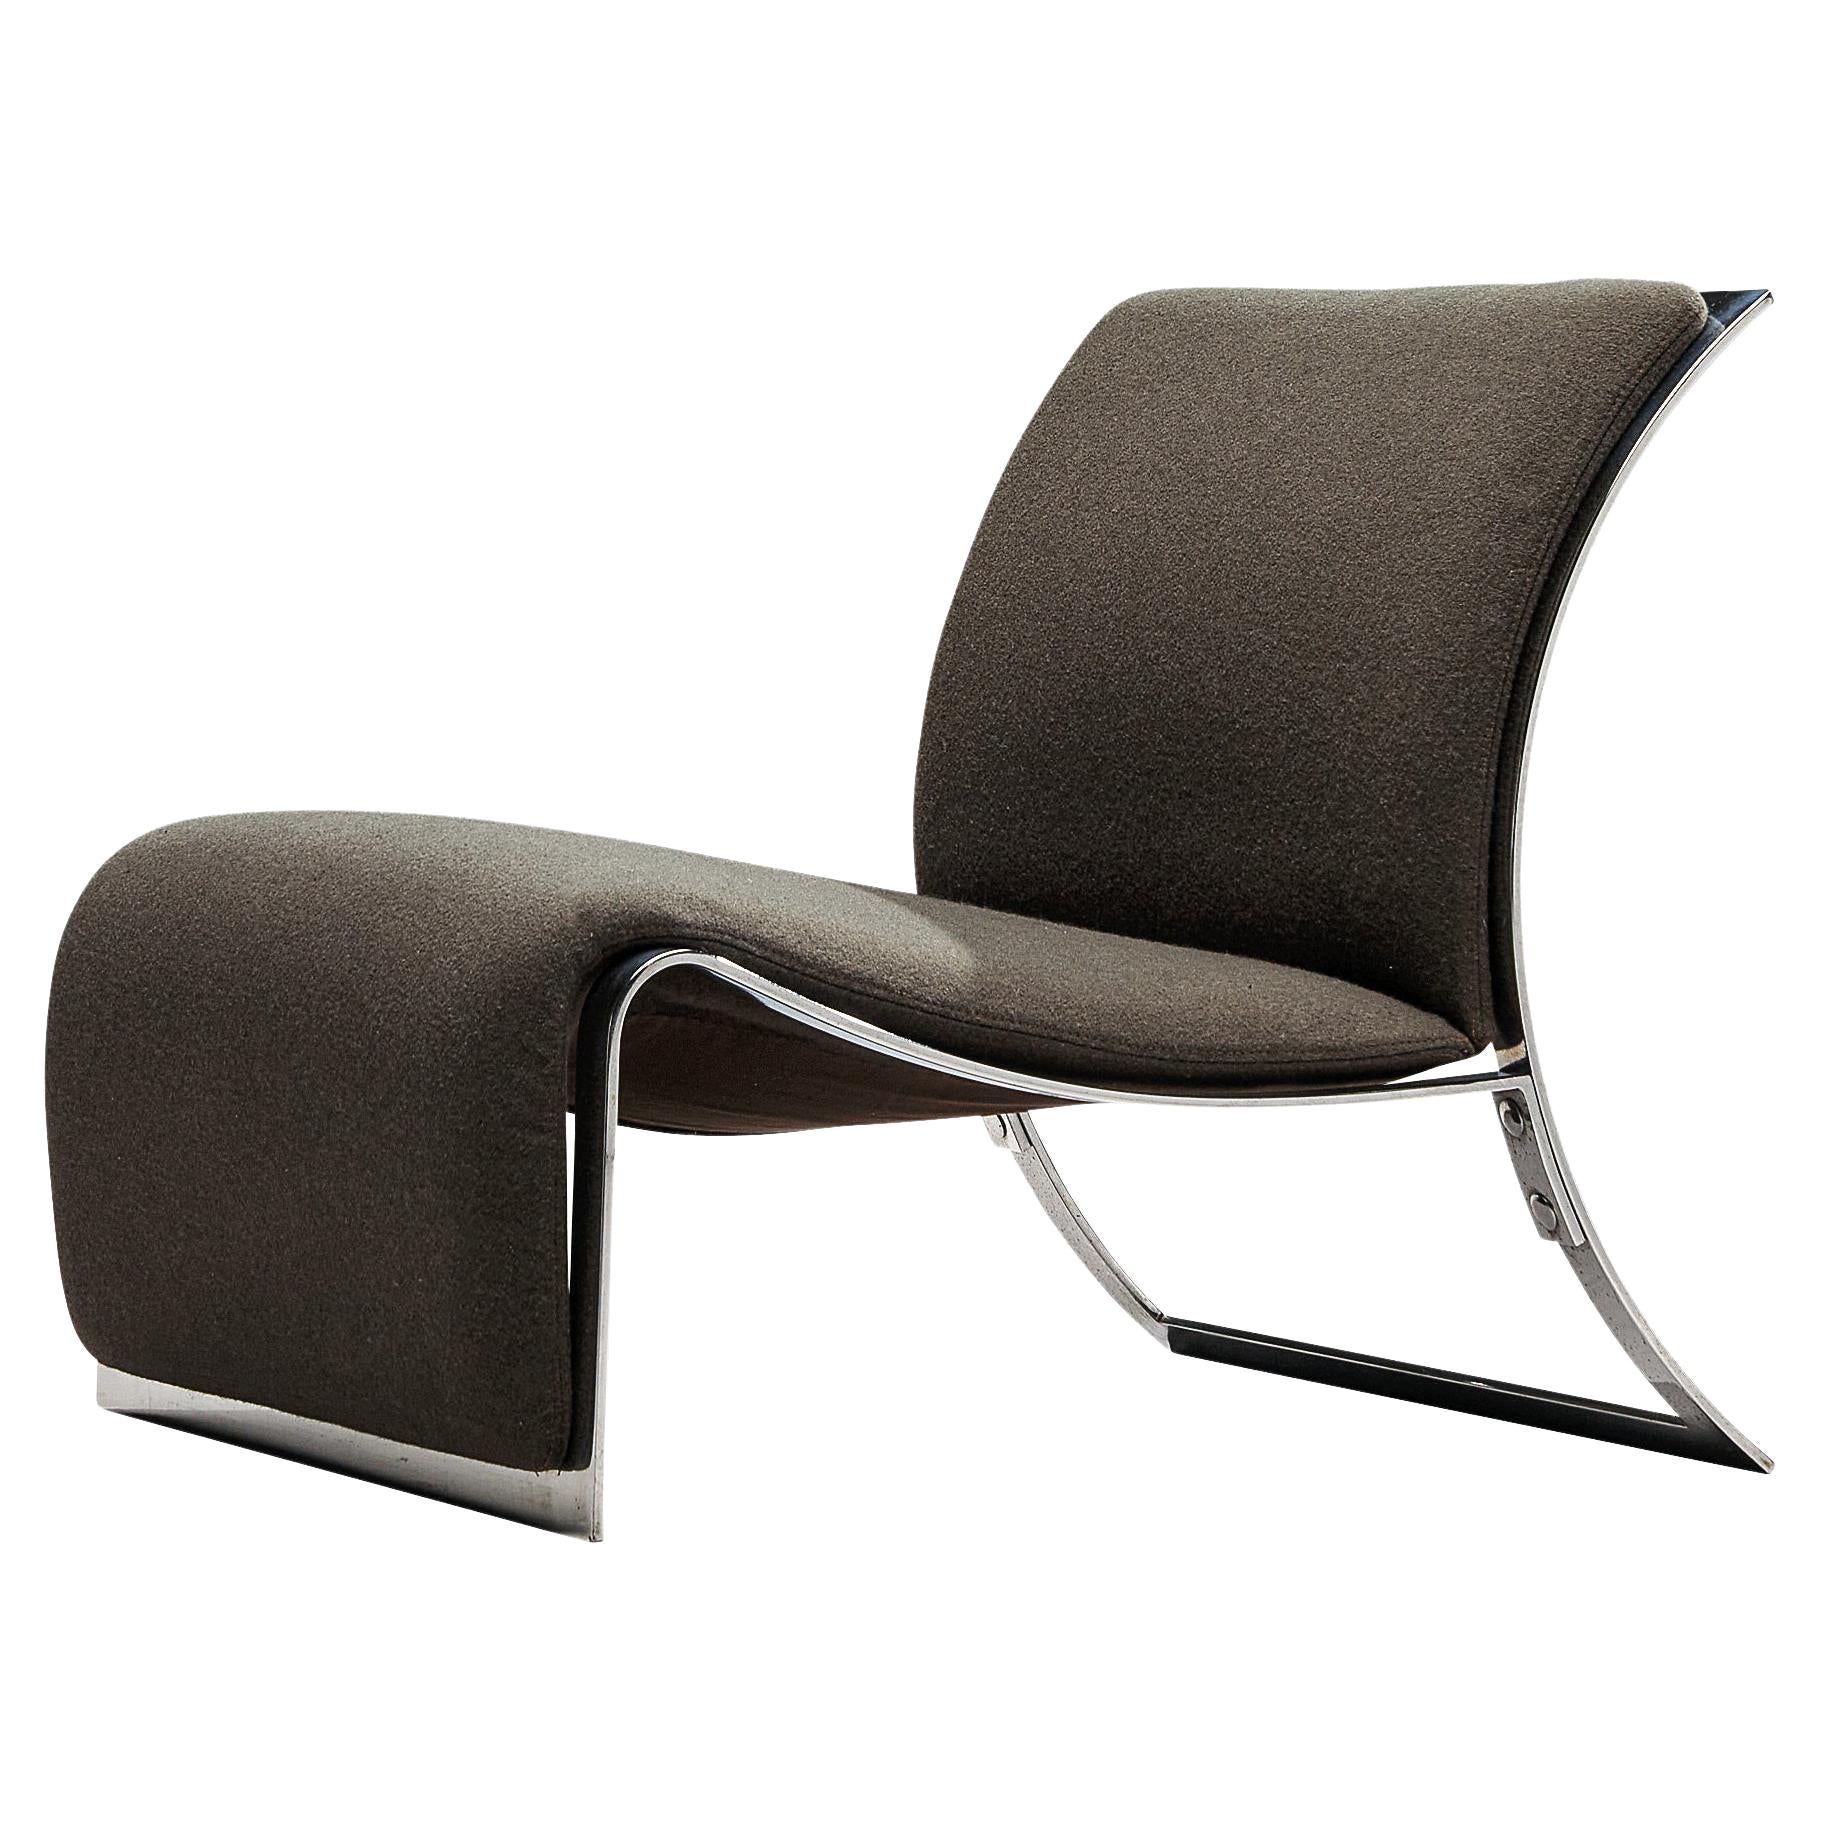 Vittorio Introini for Saporiti Lounge Chair with Frame in Chrome